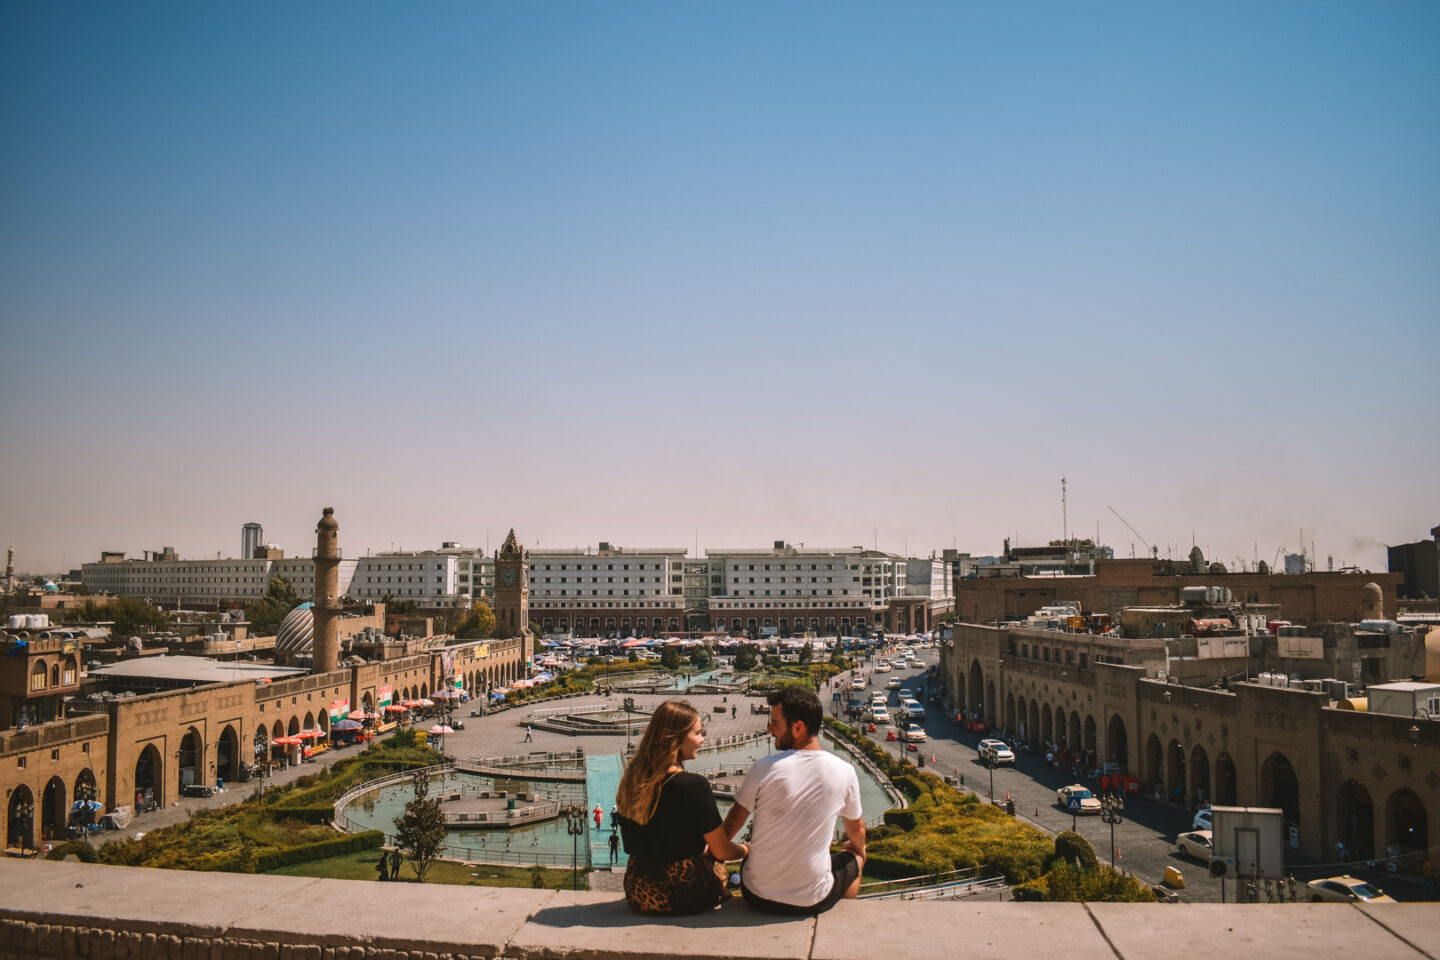 The view over Erbil city from Erbil Citadel